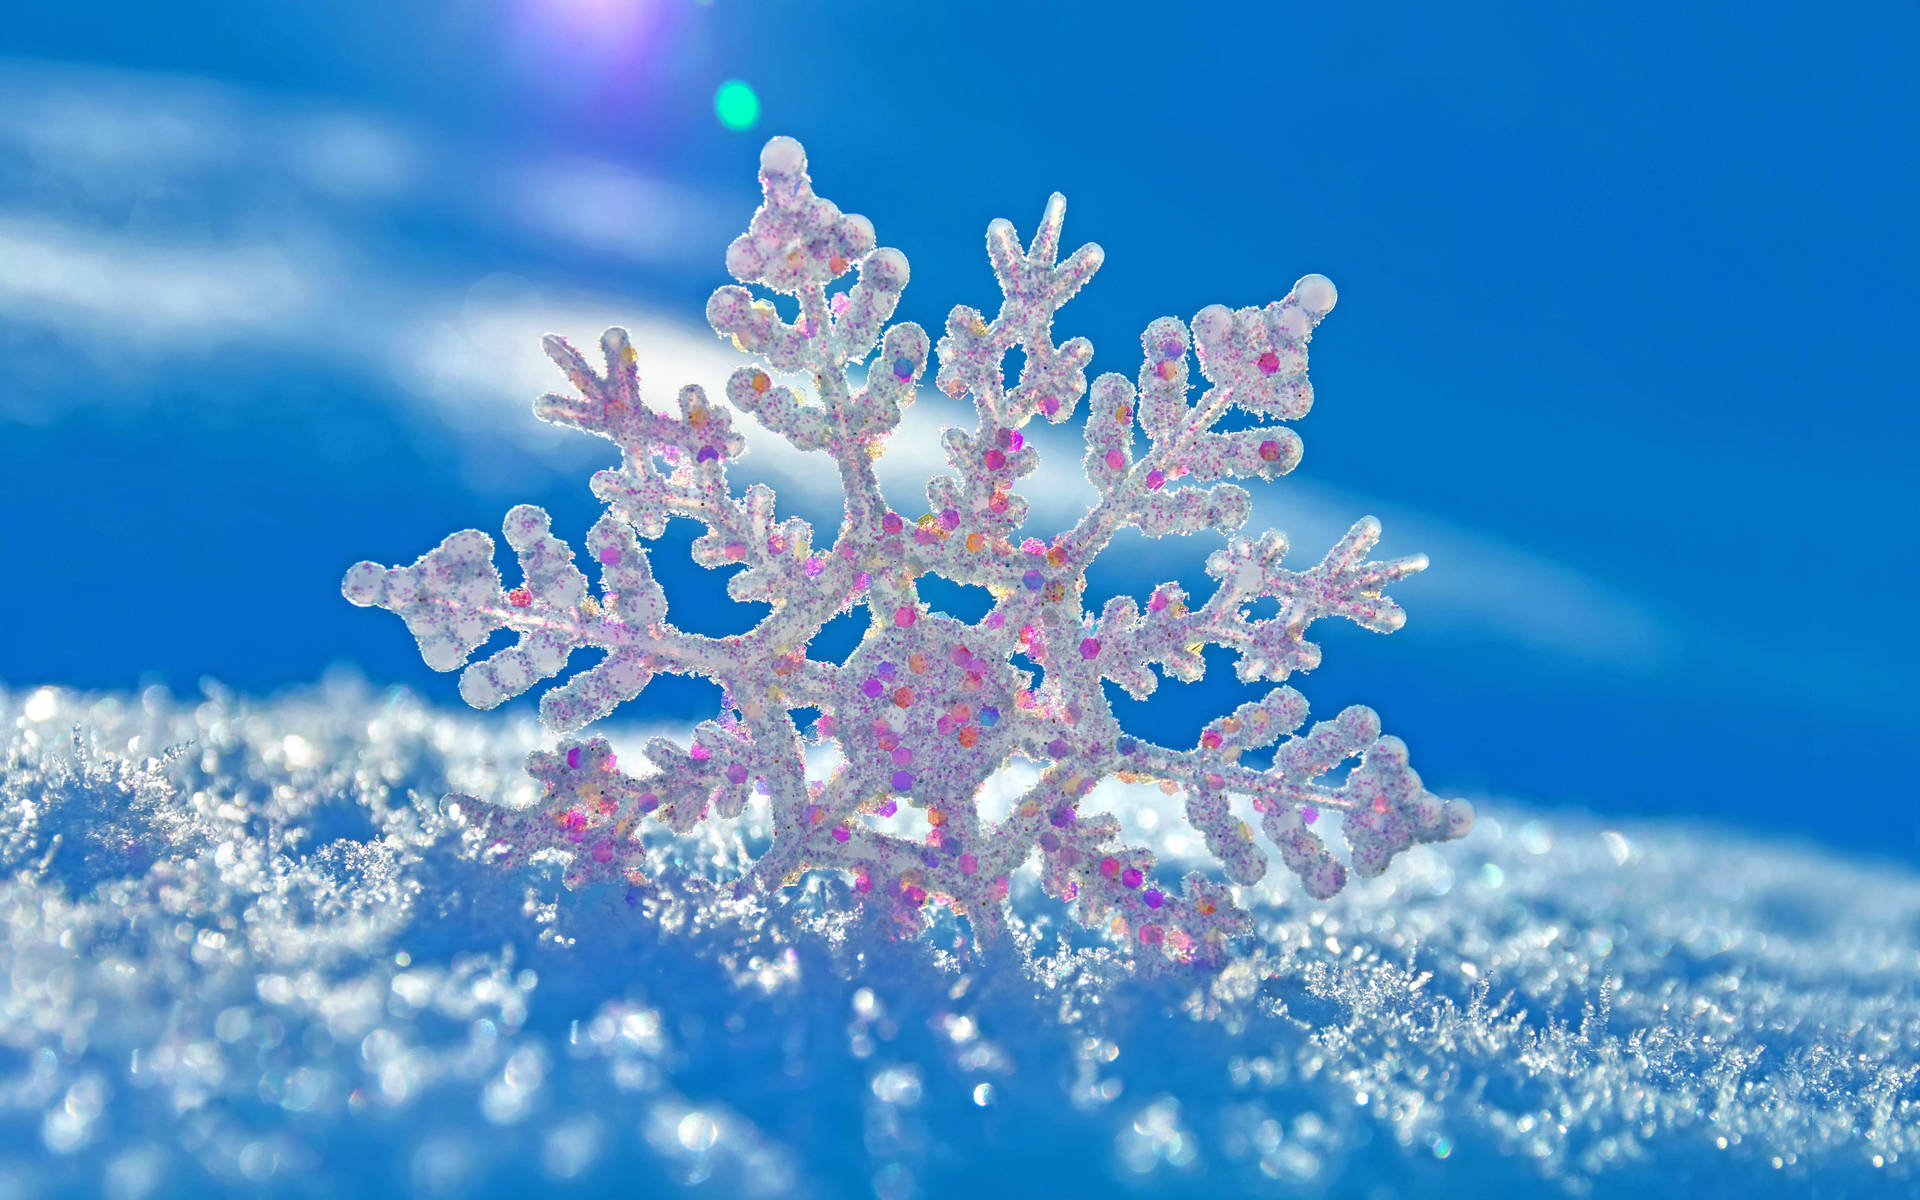 Snowflake 7947X4967 Wallpaper and Background Image